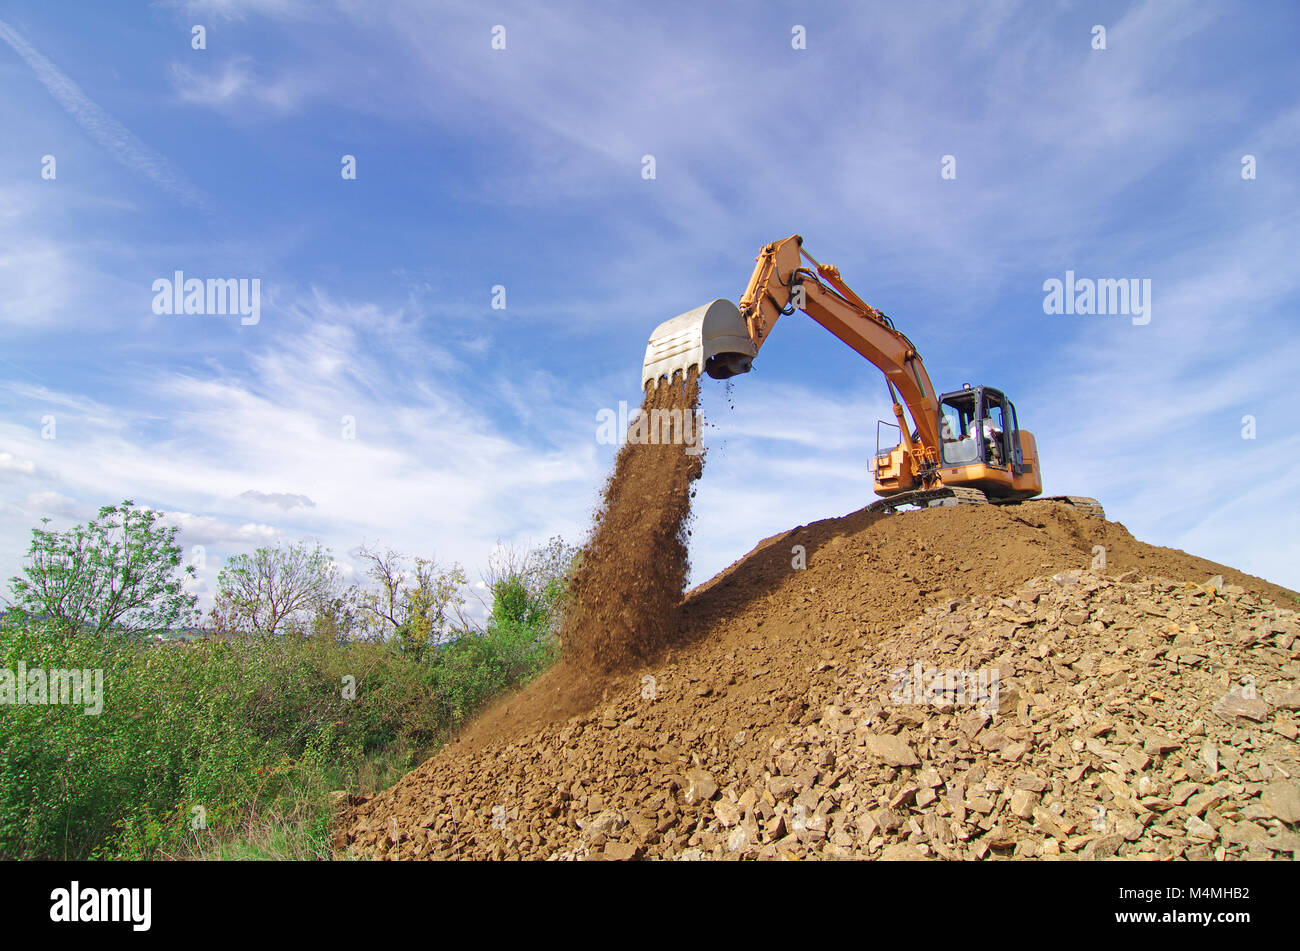 Excavator in action during earth moving works Stock Photo